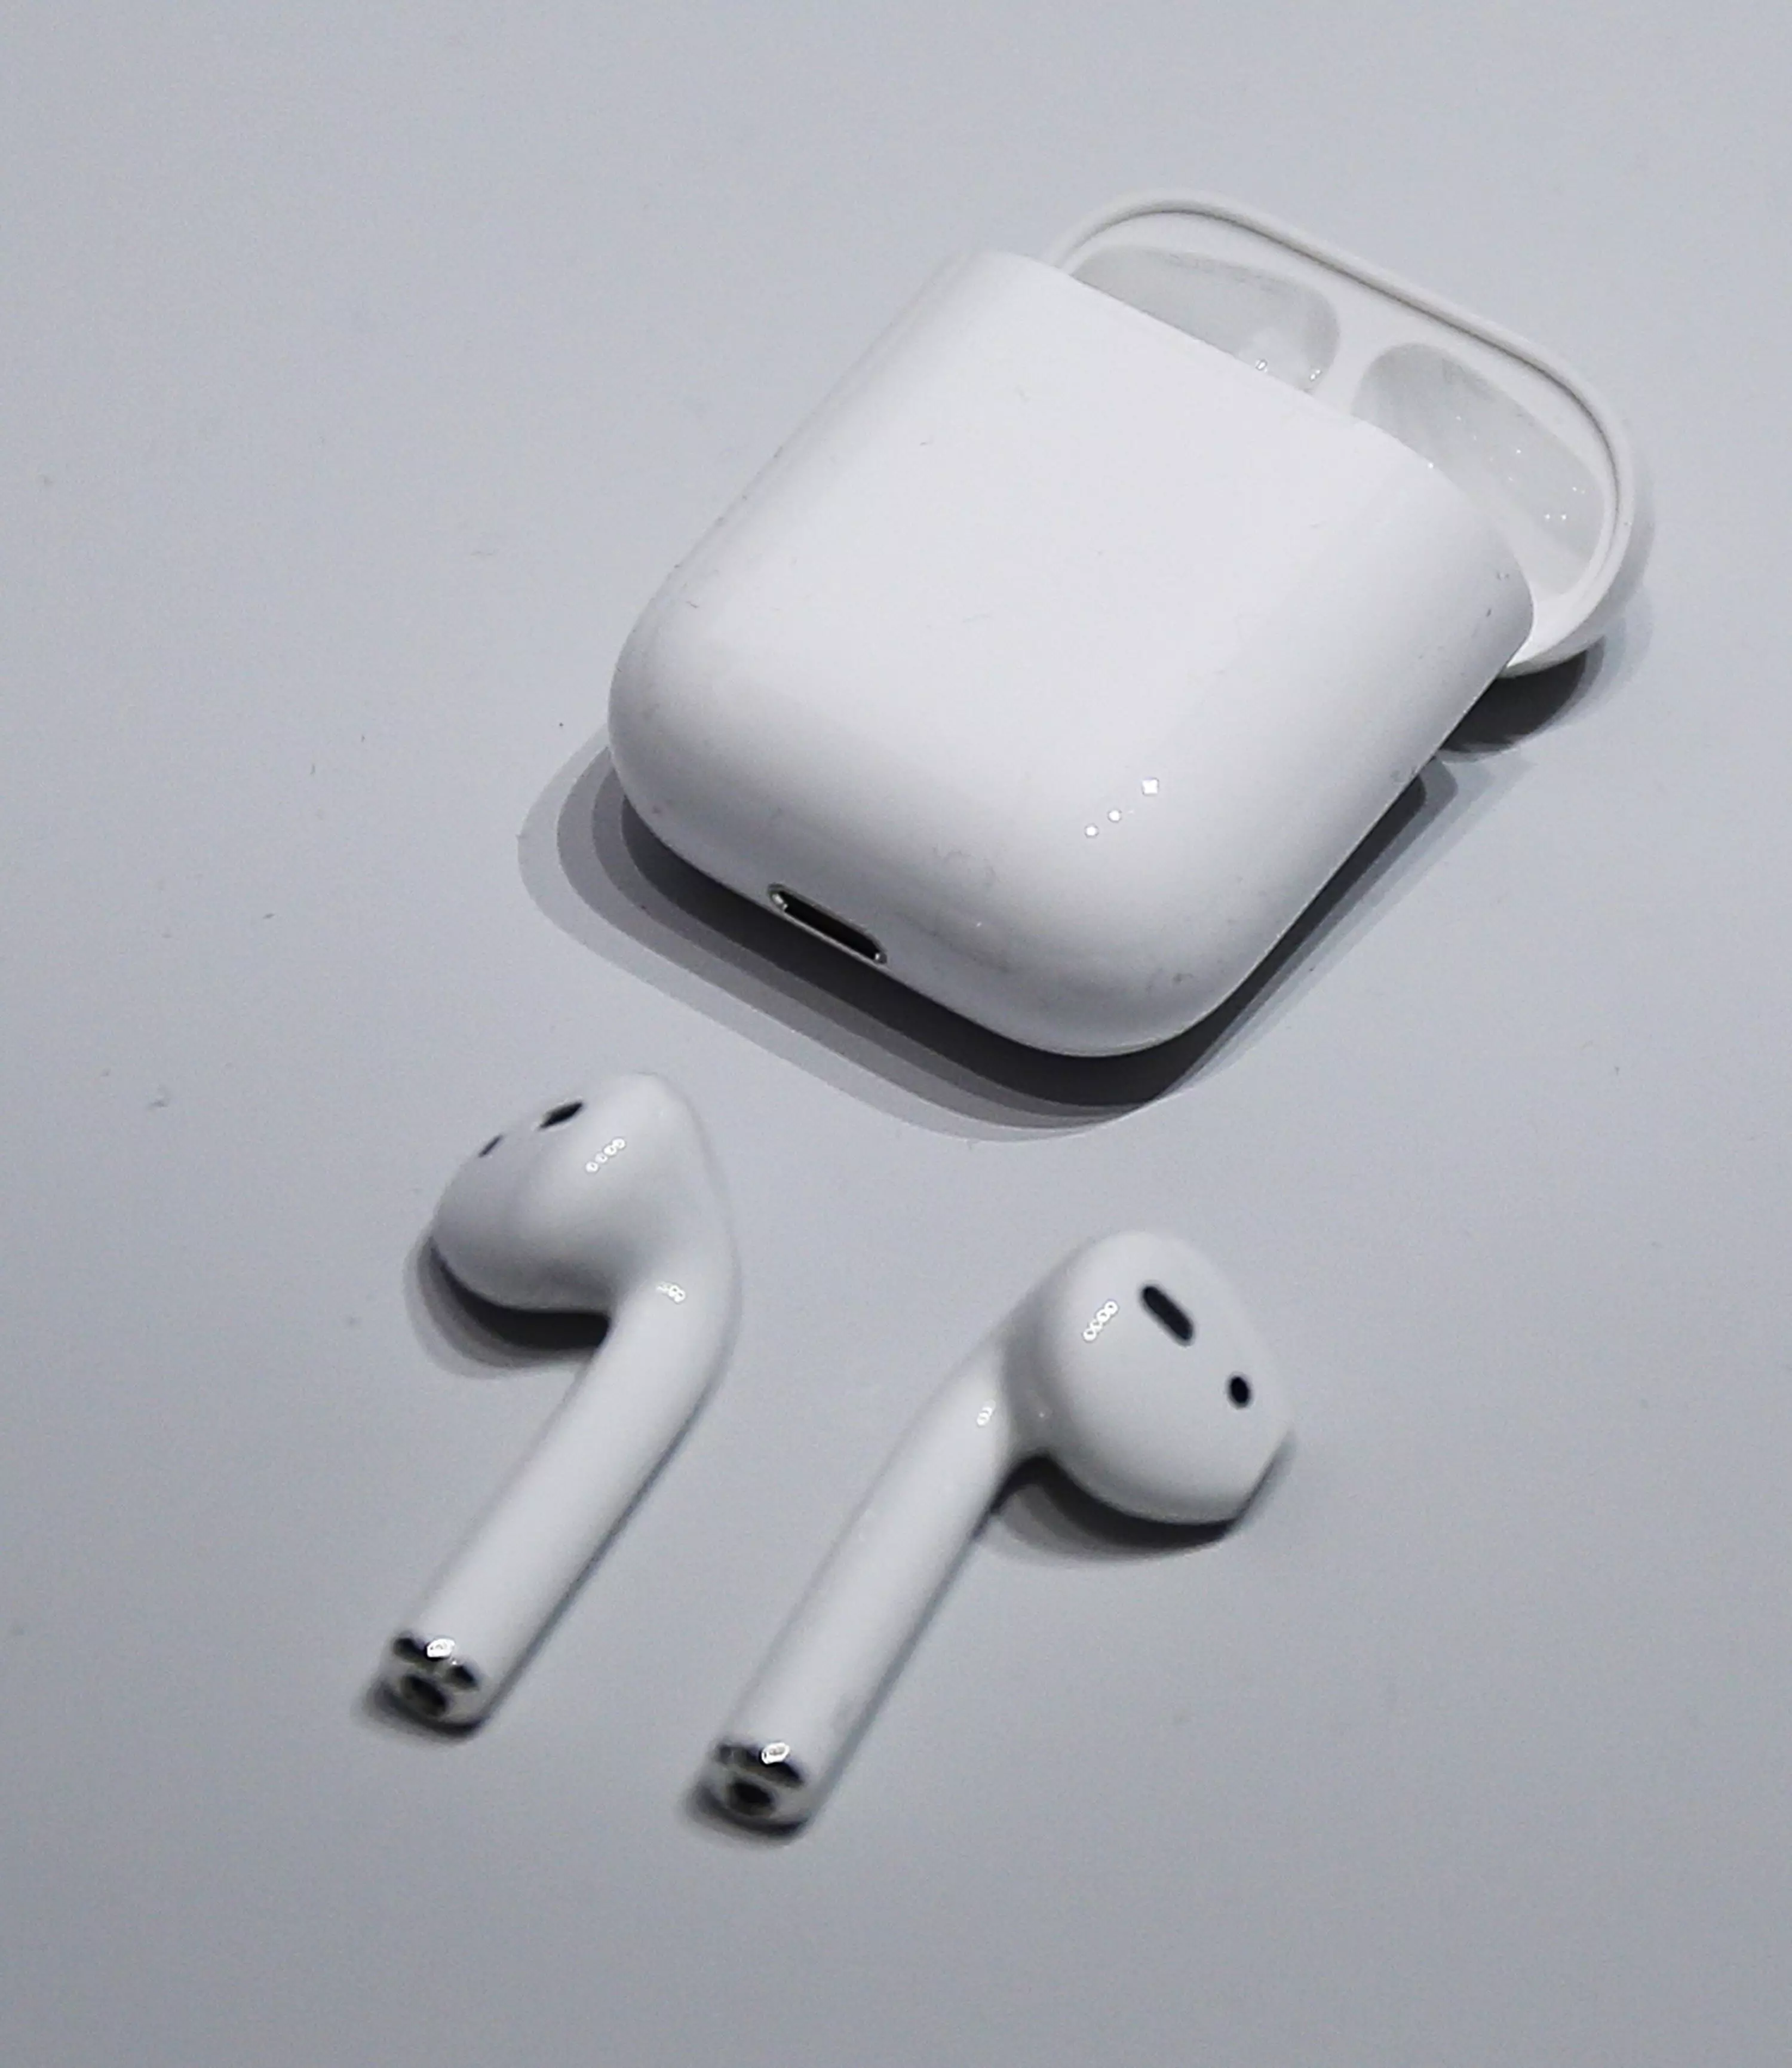 Stock image of some AirPods.